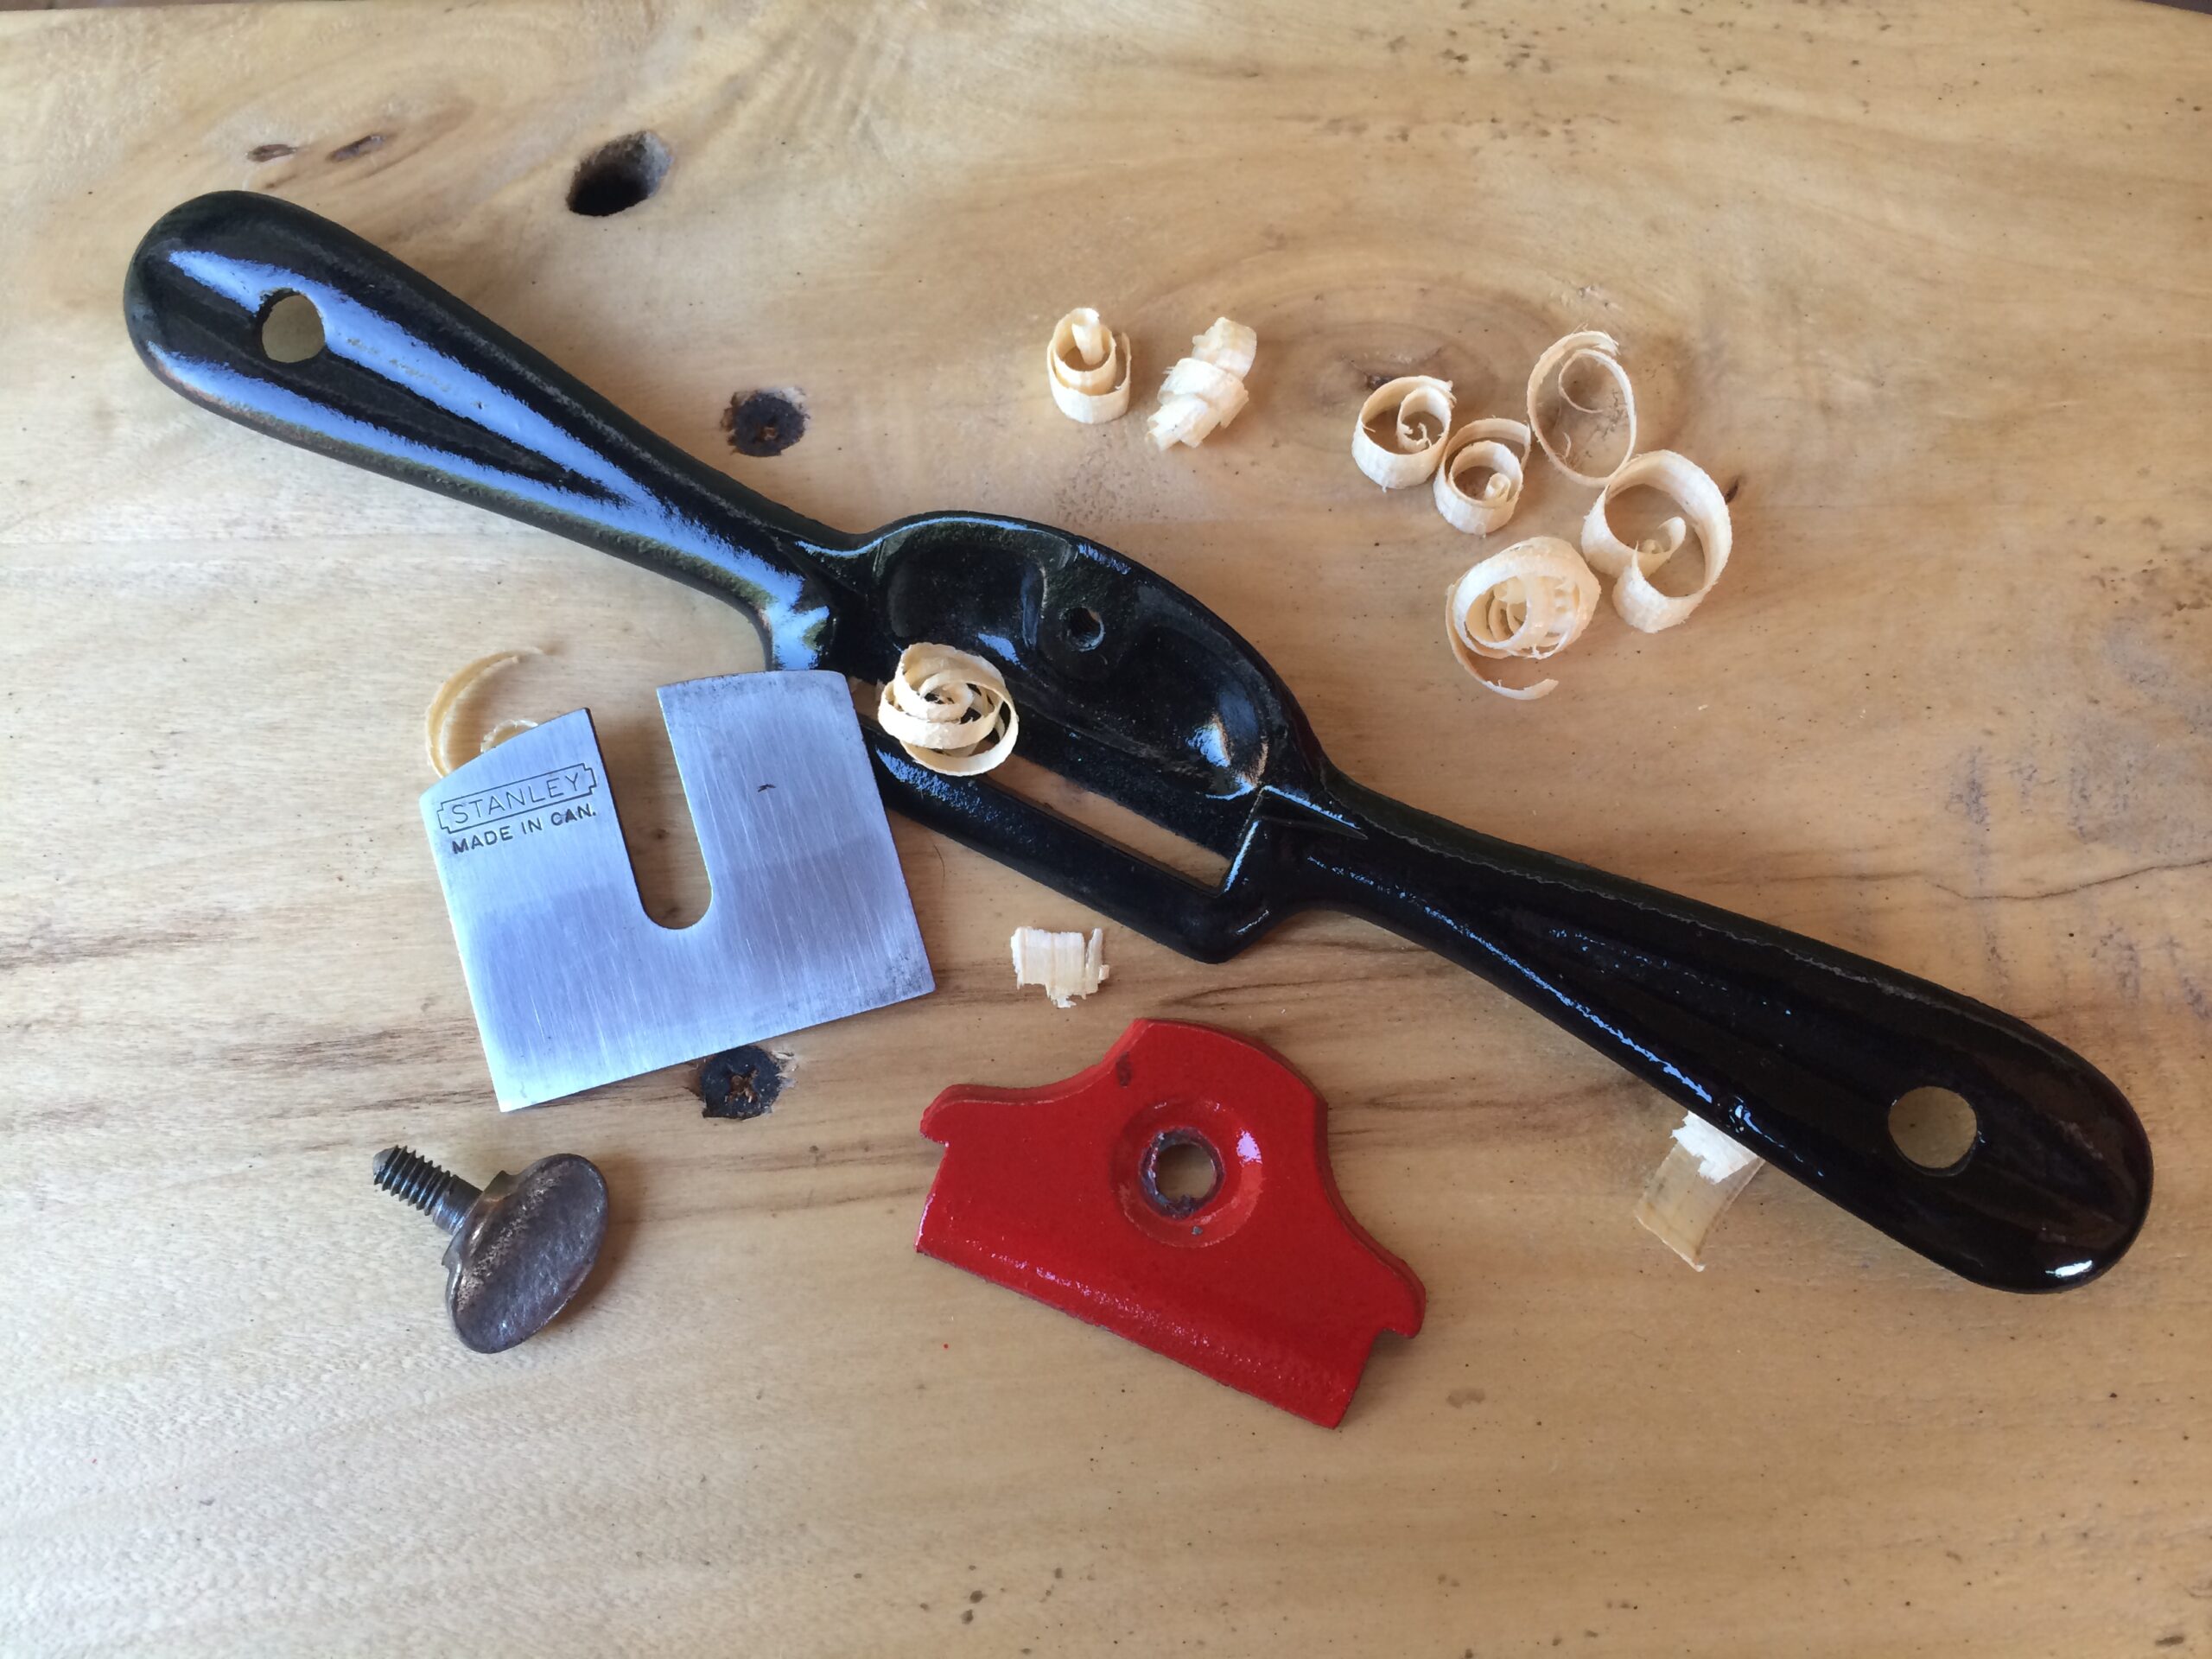 Stanley Spokeshave - 64 - Review